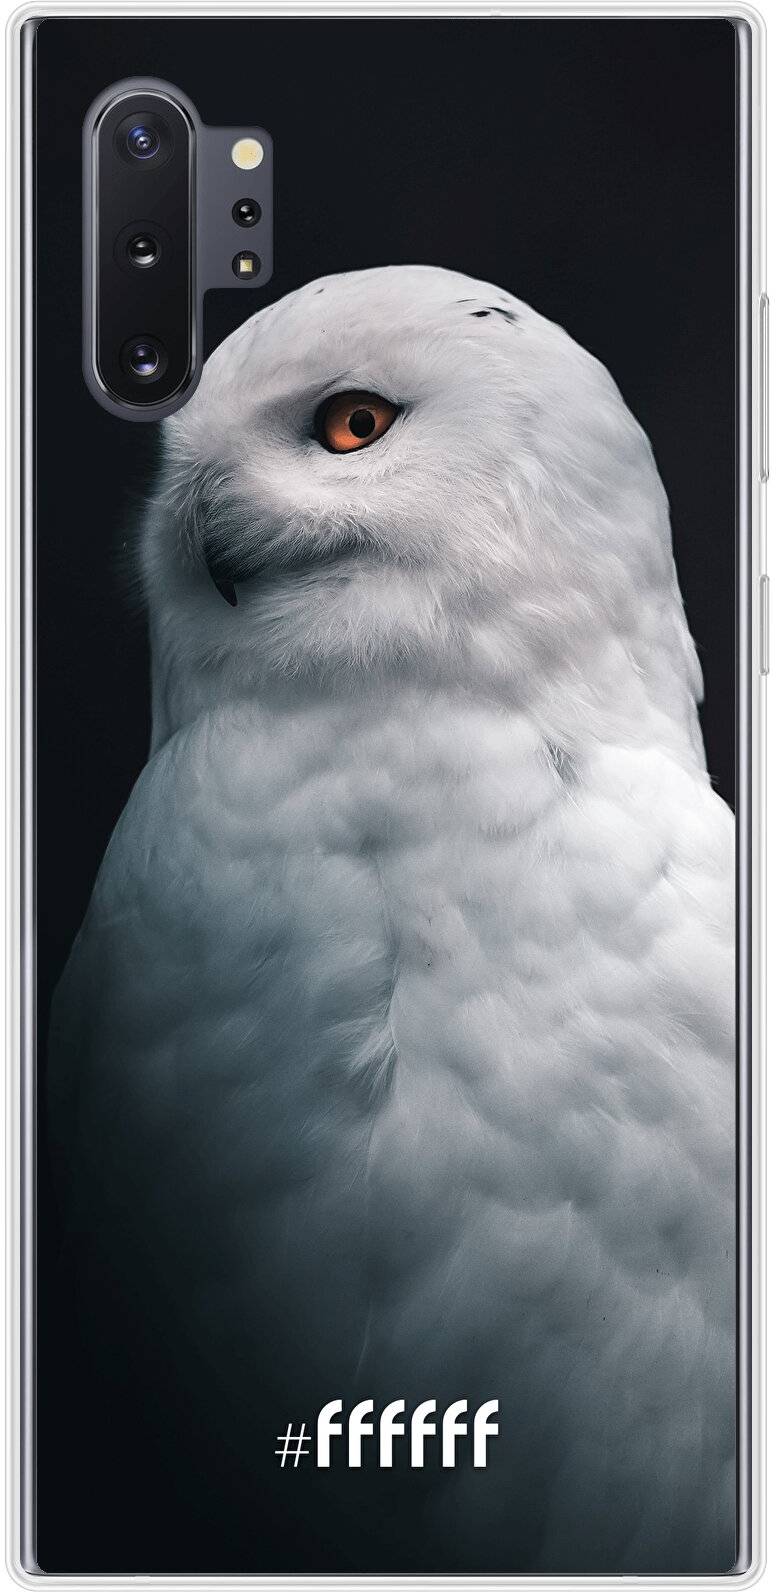 Witte Uil Galaxy Note 10 Plus